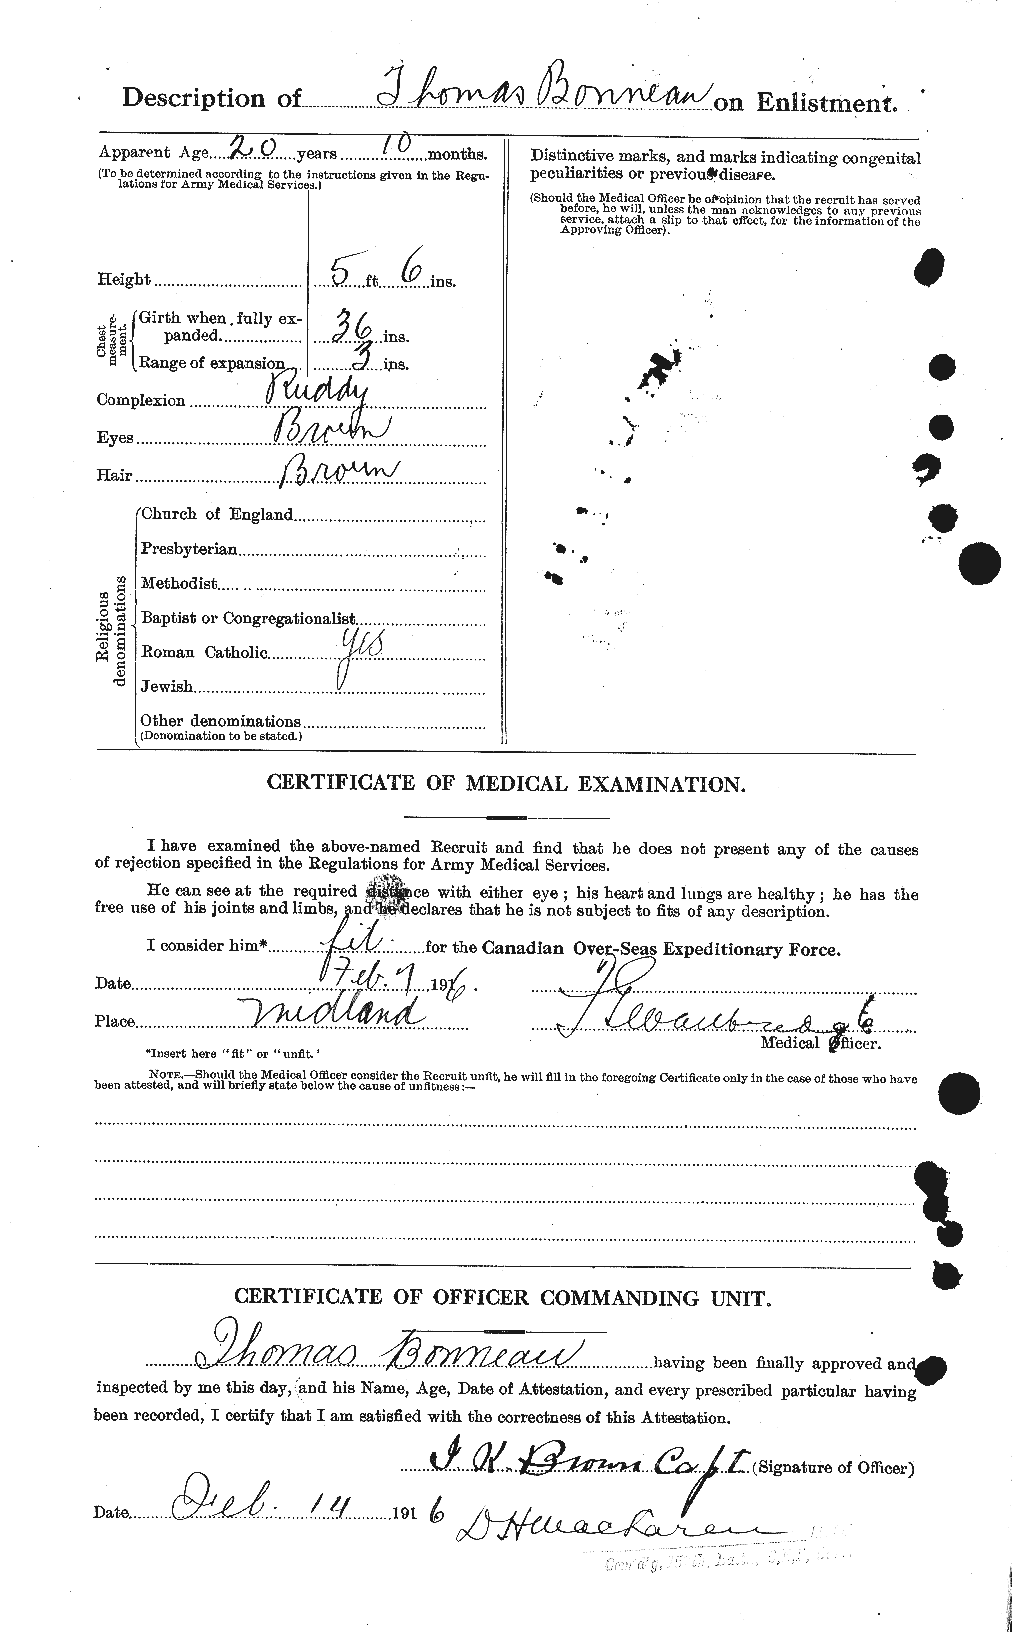 Personnel Records of the First World War - CEF 250723b